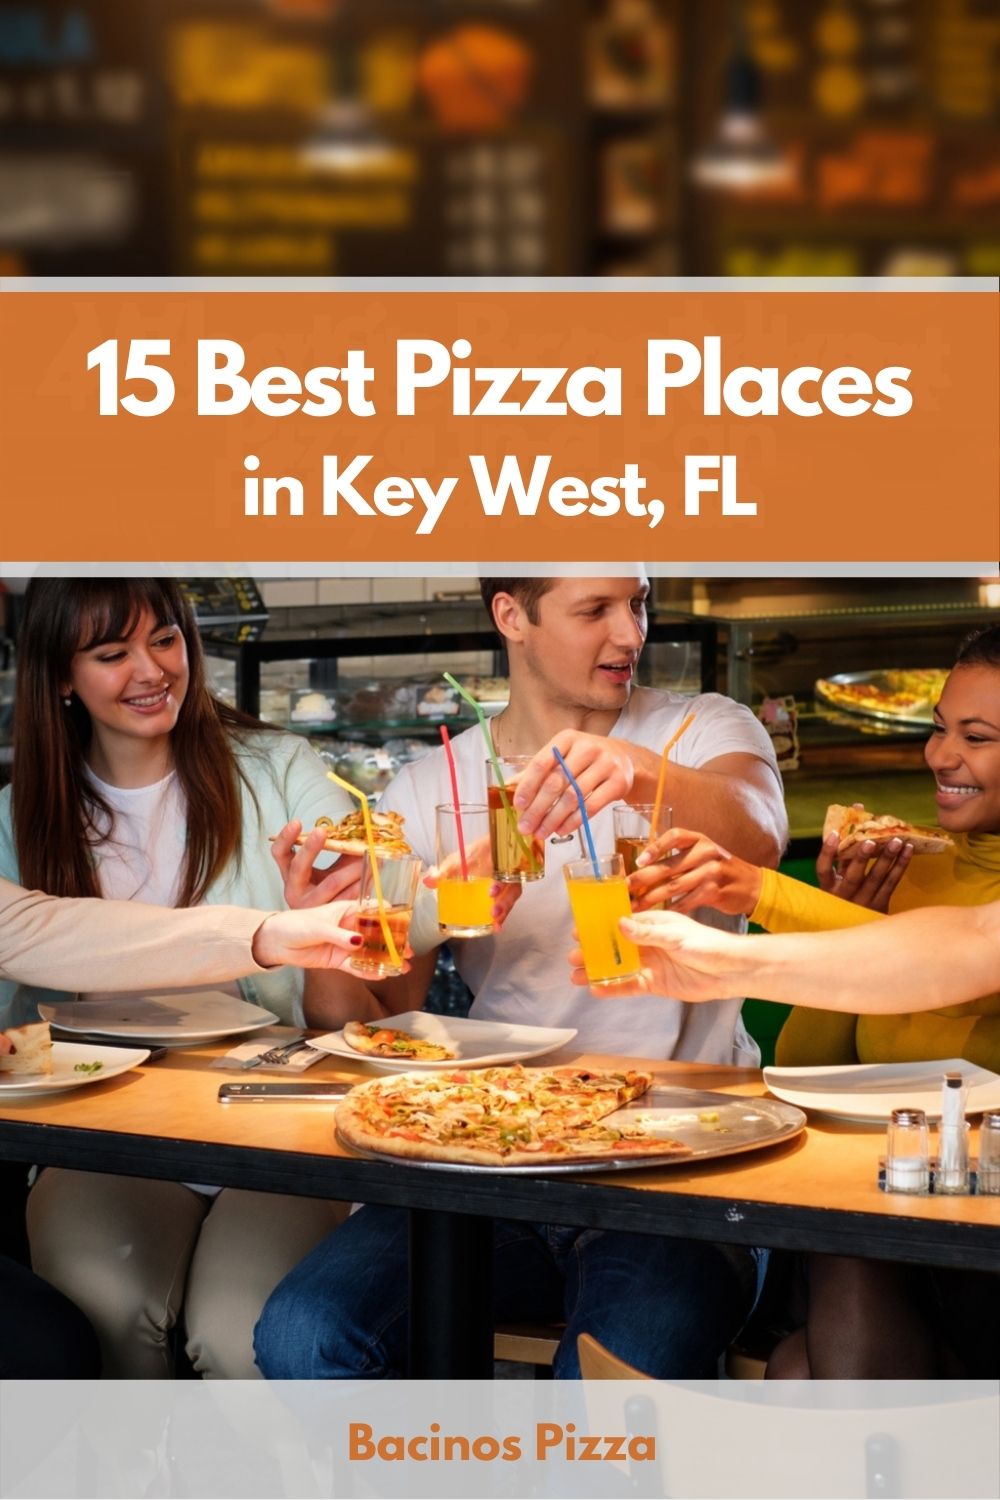 15 Best Pizza Places in Key West, FL pin 2